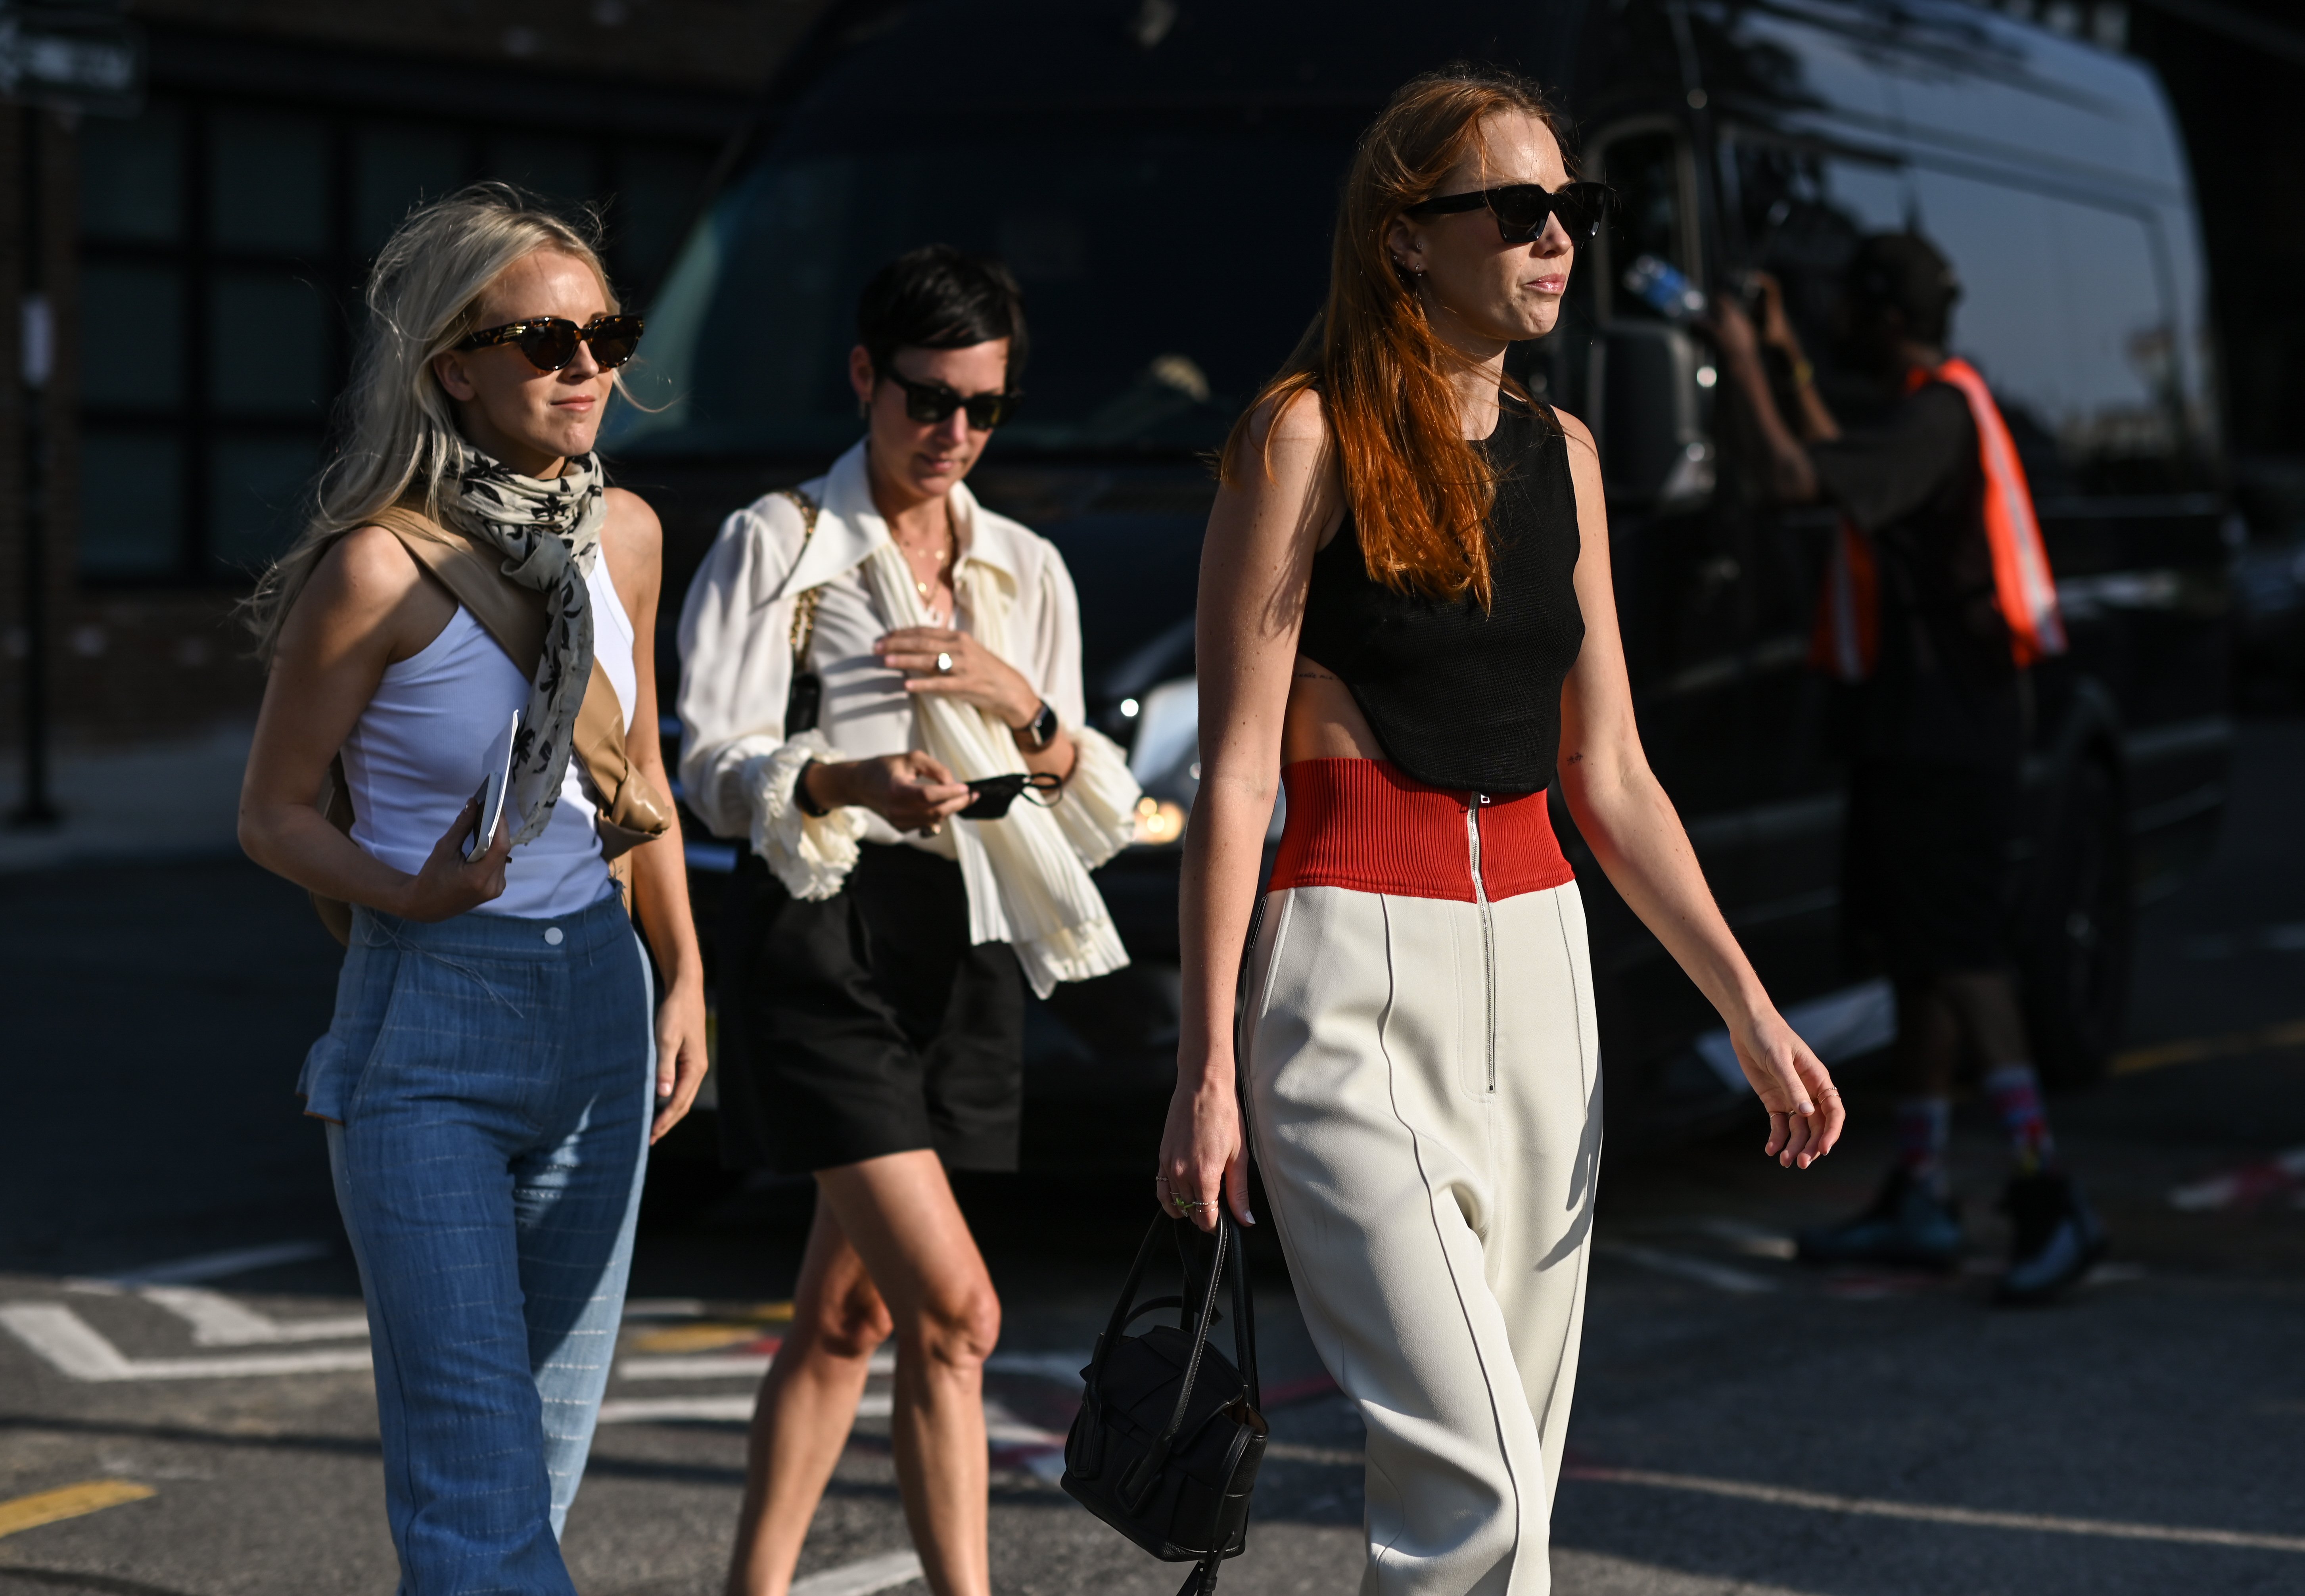 Bianca Lane, Beth Buccini and Tiernan Cowling are seen outside the Peter Do show during New York Fashion Week S/S 22 in New York City on September 08, 2021 | Source: Getty Images